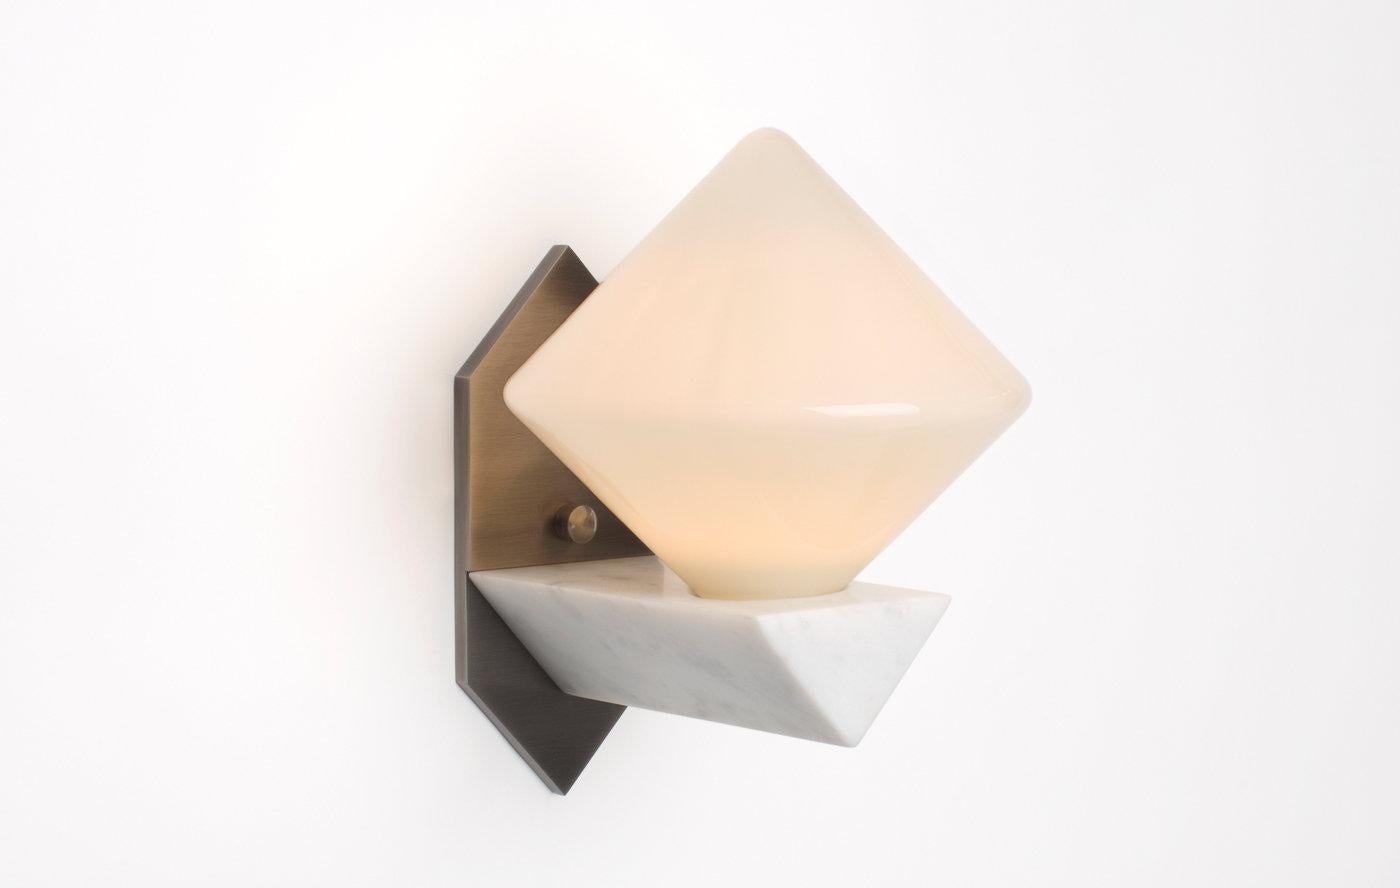 Originally inspired by Victorian balancing toys, the Themis 6 sconce juxtaposes the cone form of its hand blown glass diffuser with the triangular shape of its marble support bracket.